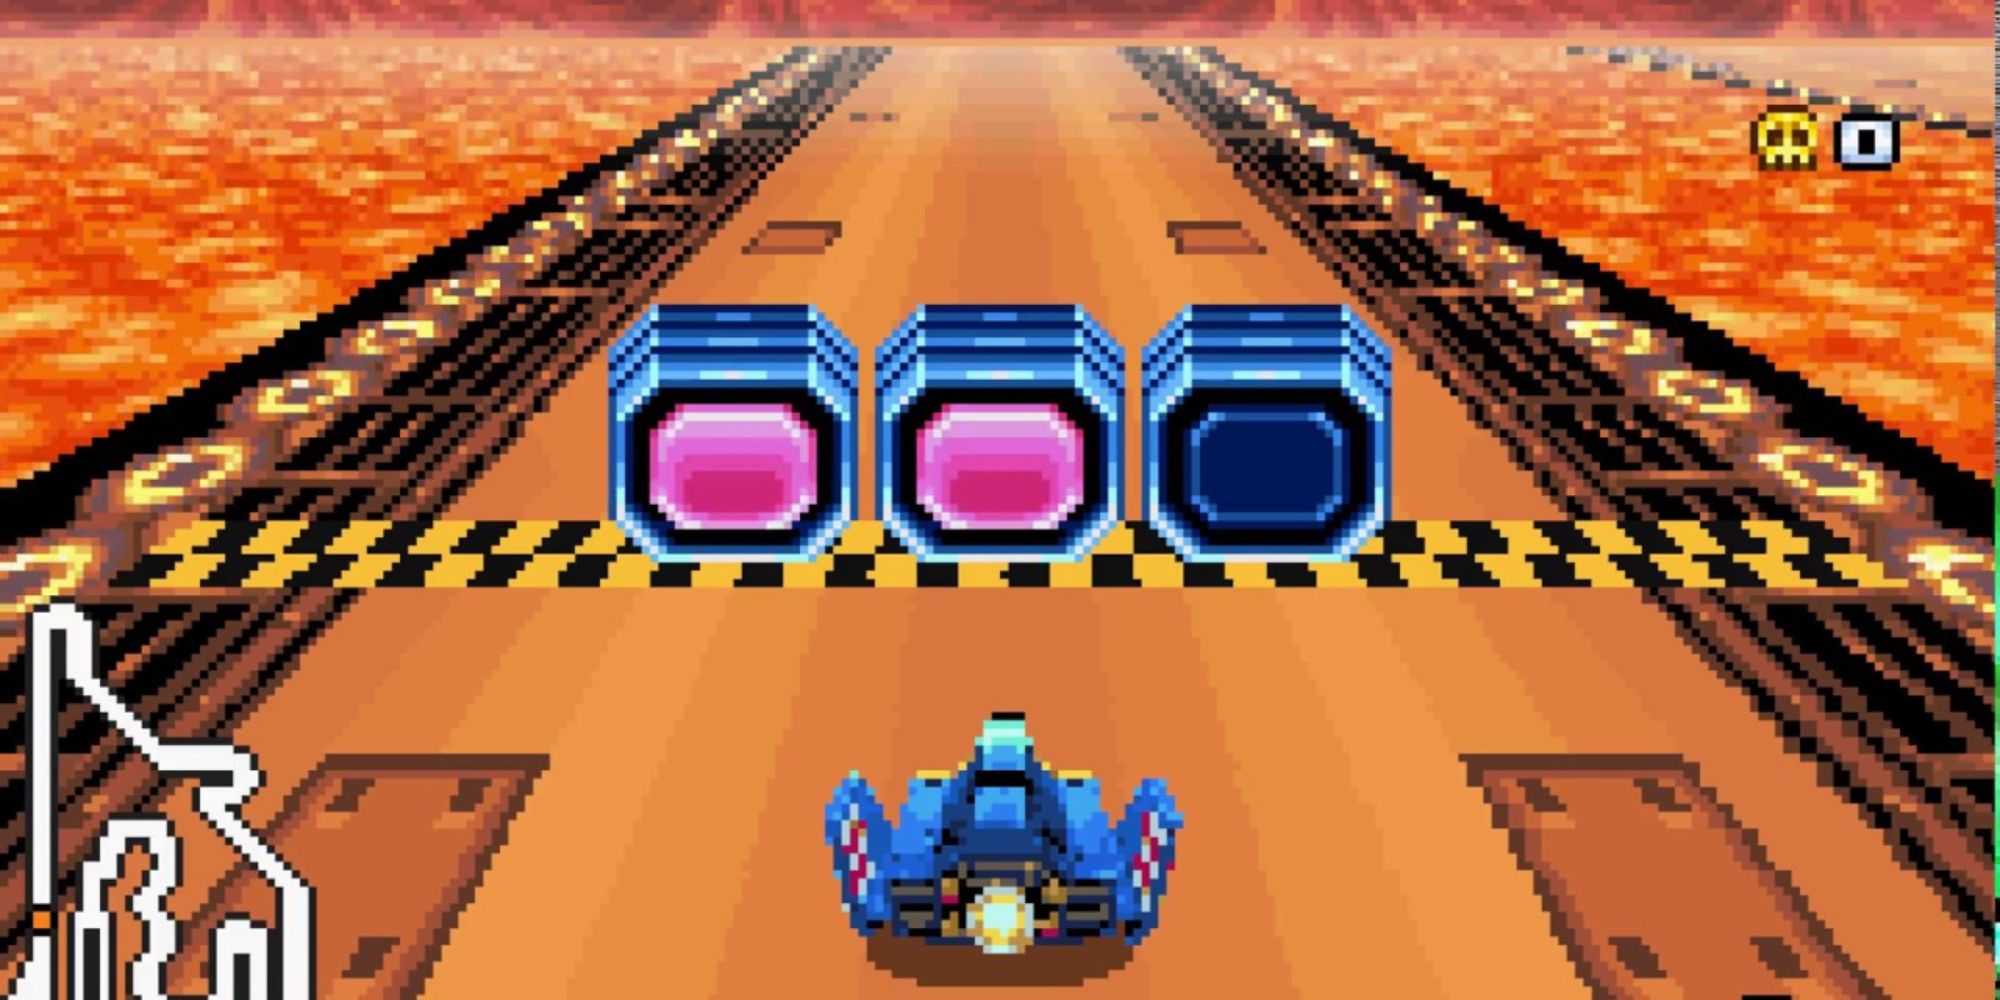 A race that starts in F-Zero Climax